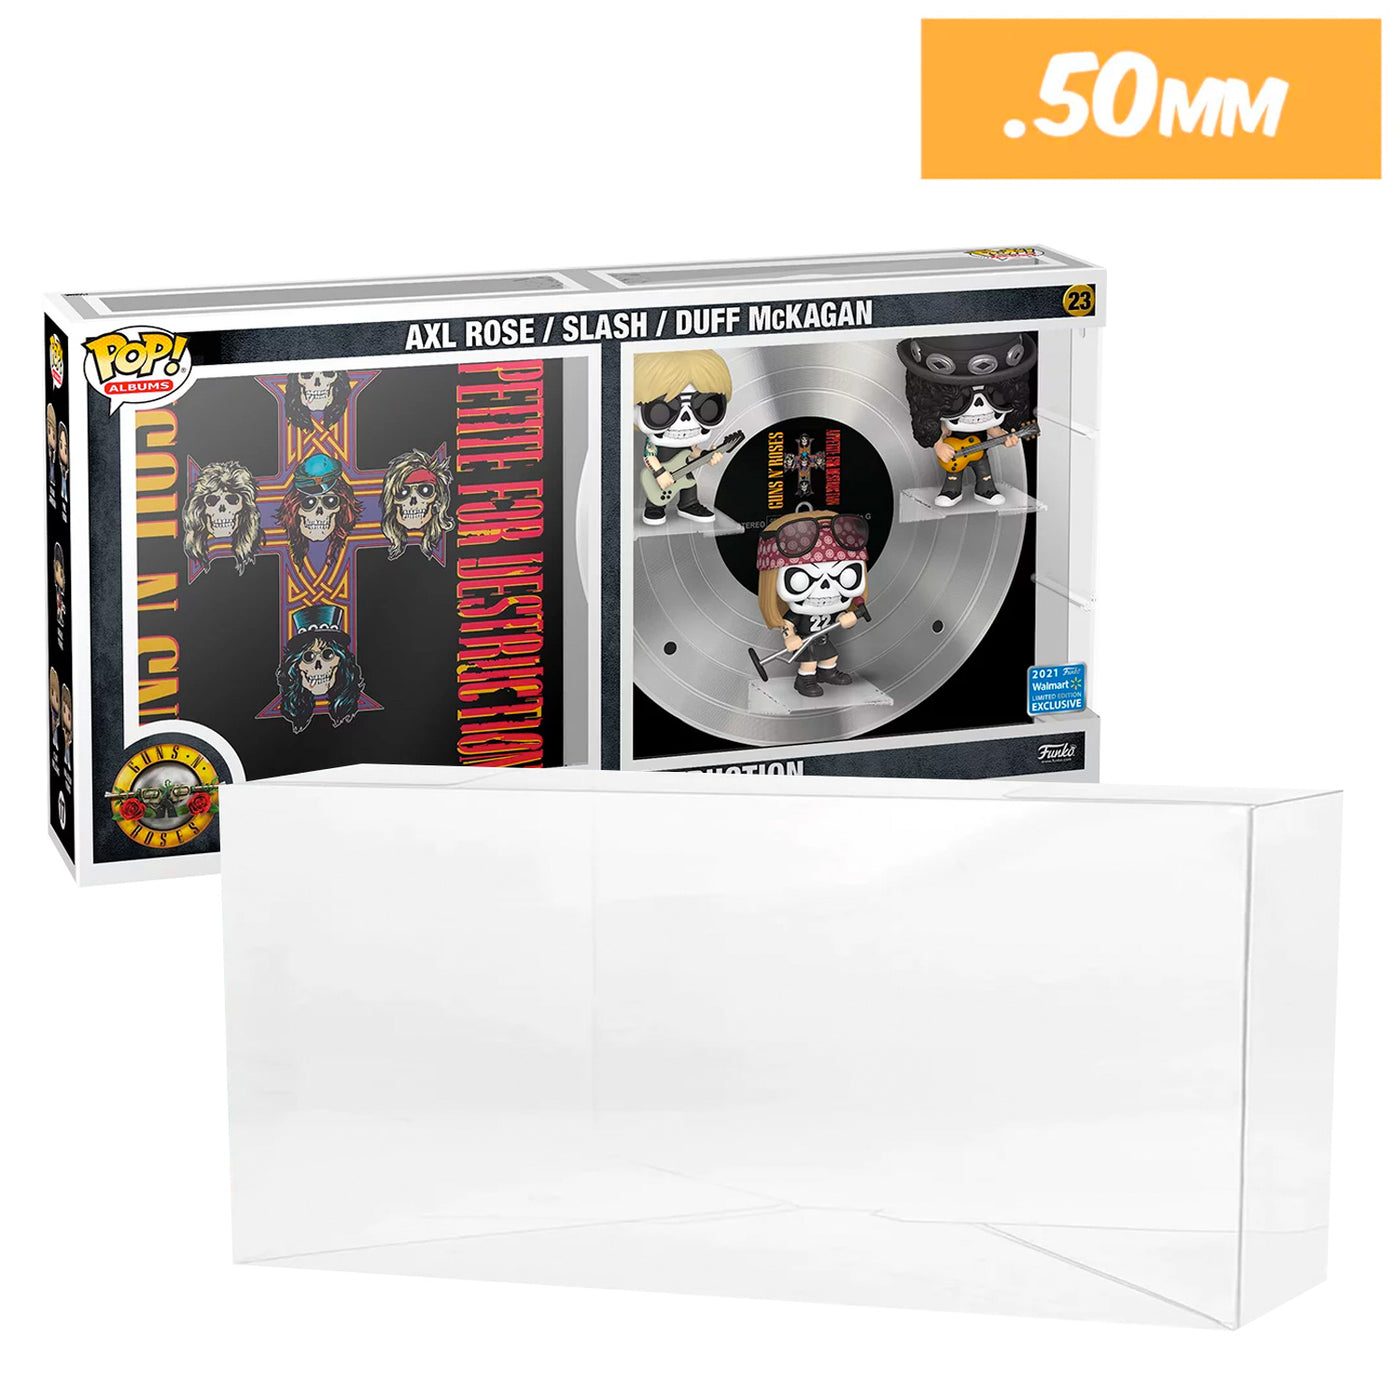 23 guns n roses pop albums deluxe best funko pop protectors thick strong uv scratch flat top stack vinyl display geek plastic shield vaulted eco armor fits collect protect display case kollector protector